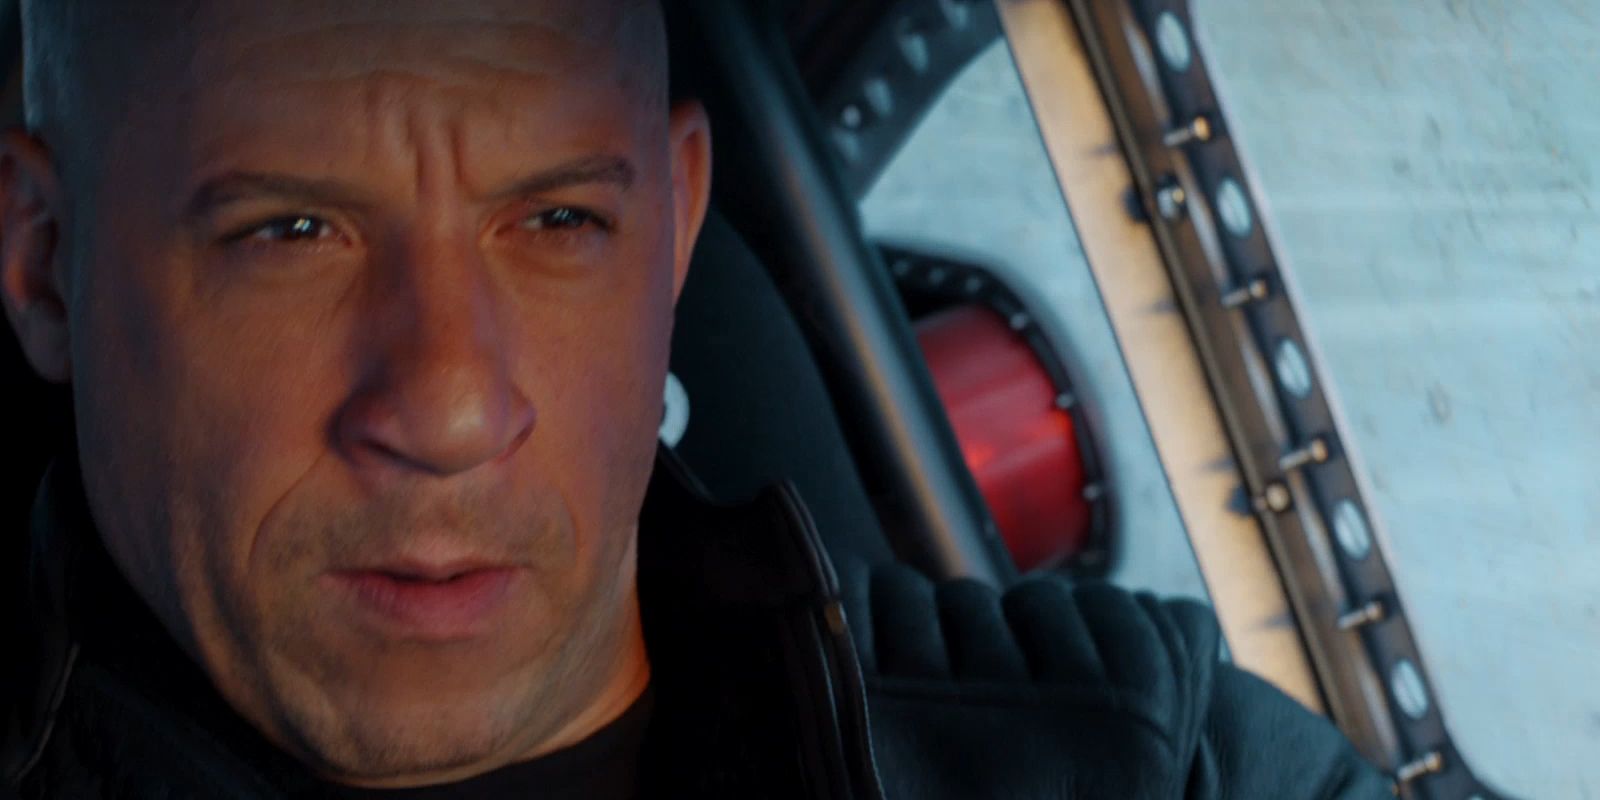 Dominic Toretto is Serious in Fate of the Furious